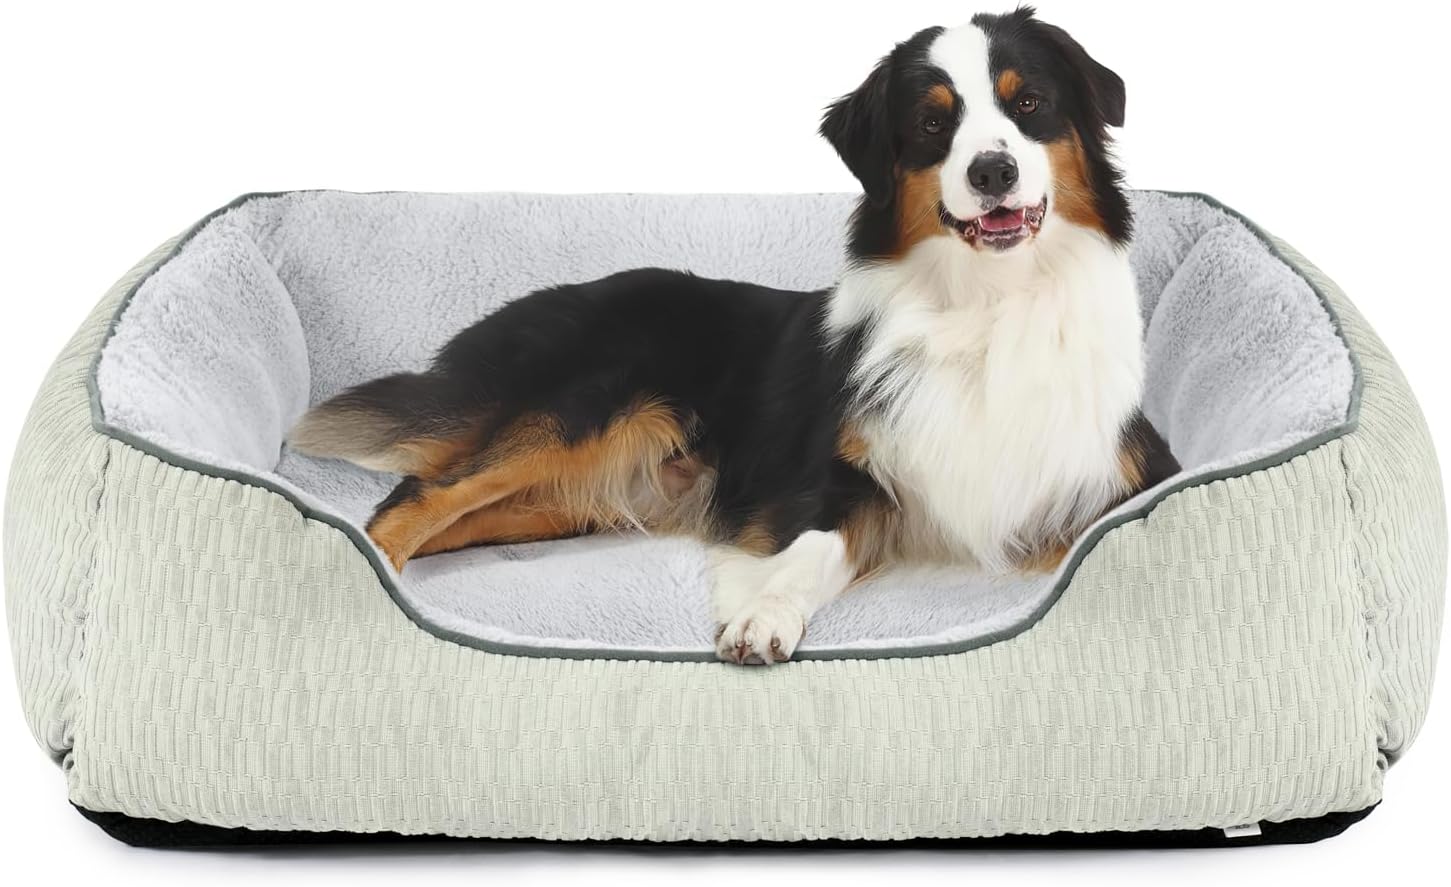 FURTIME Dog Beds for Medium Dogs, Medium Dog Bed 20x16 Soft and Comfy Washable Dog Bed, Warming Dog Beds Furniture Calming Dog Bed Breathable Pet Bed Deluxe Dog Beds with Non-Slip Bottom